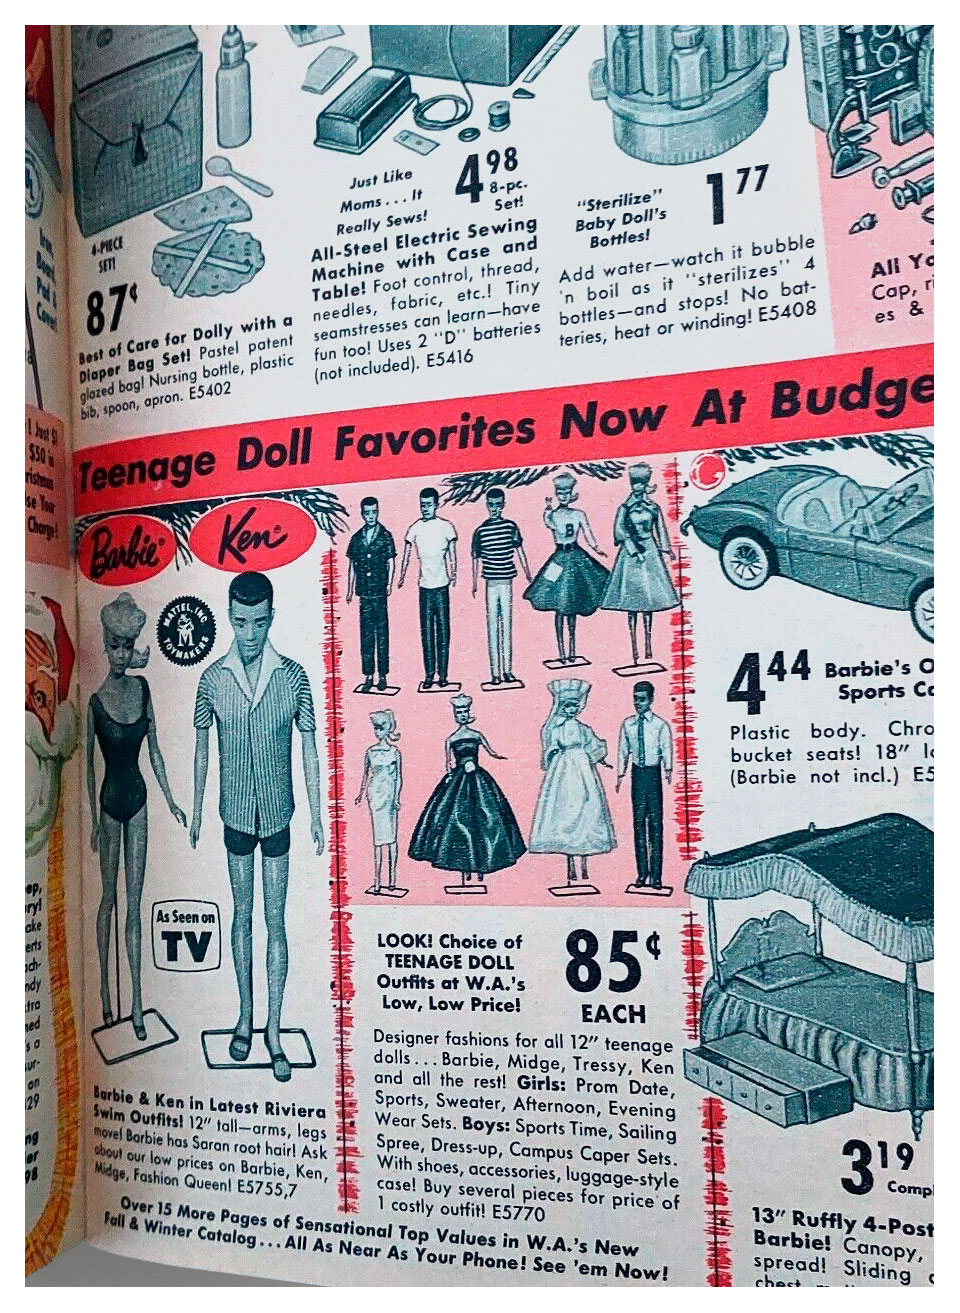 From 1964 Western Auto Christmas Gifts catalogue